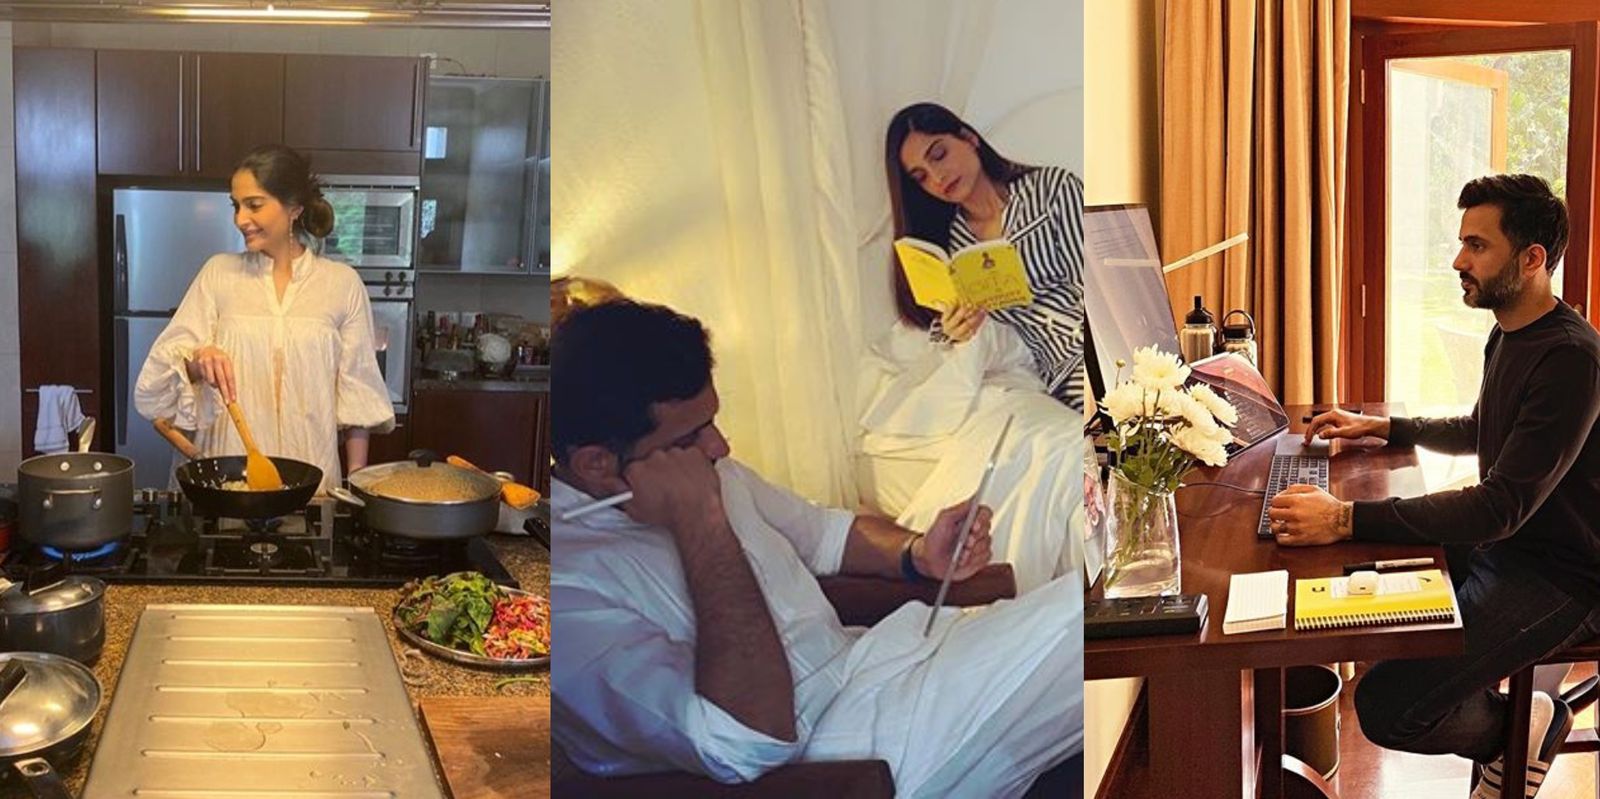 Sonam Kapoor Shares Pictures Of Her Luxurious Home, And Husband Anand Ahuja's Covetable Shoe Collection; See Posts